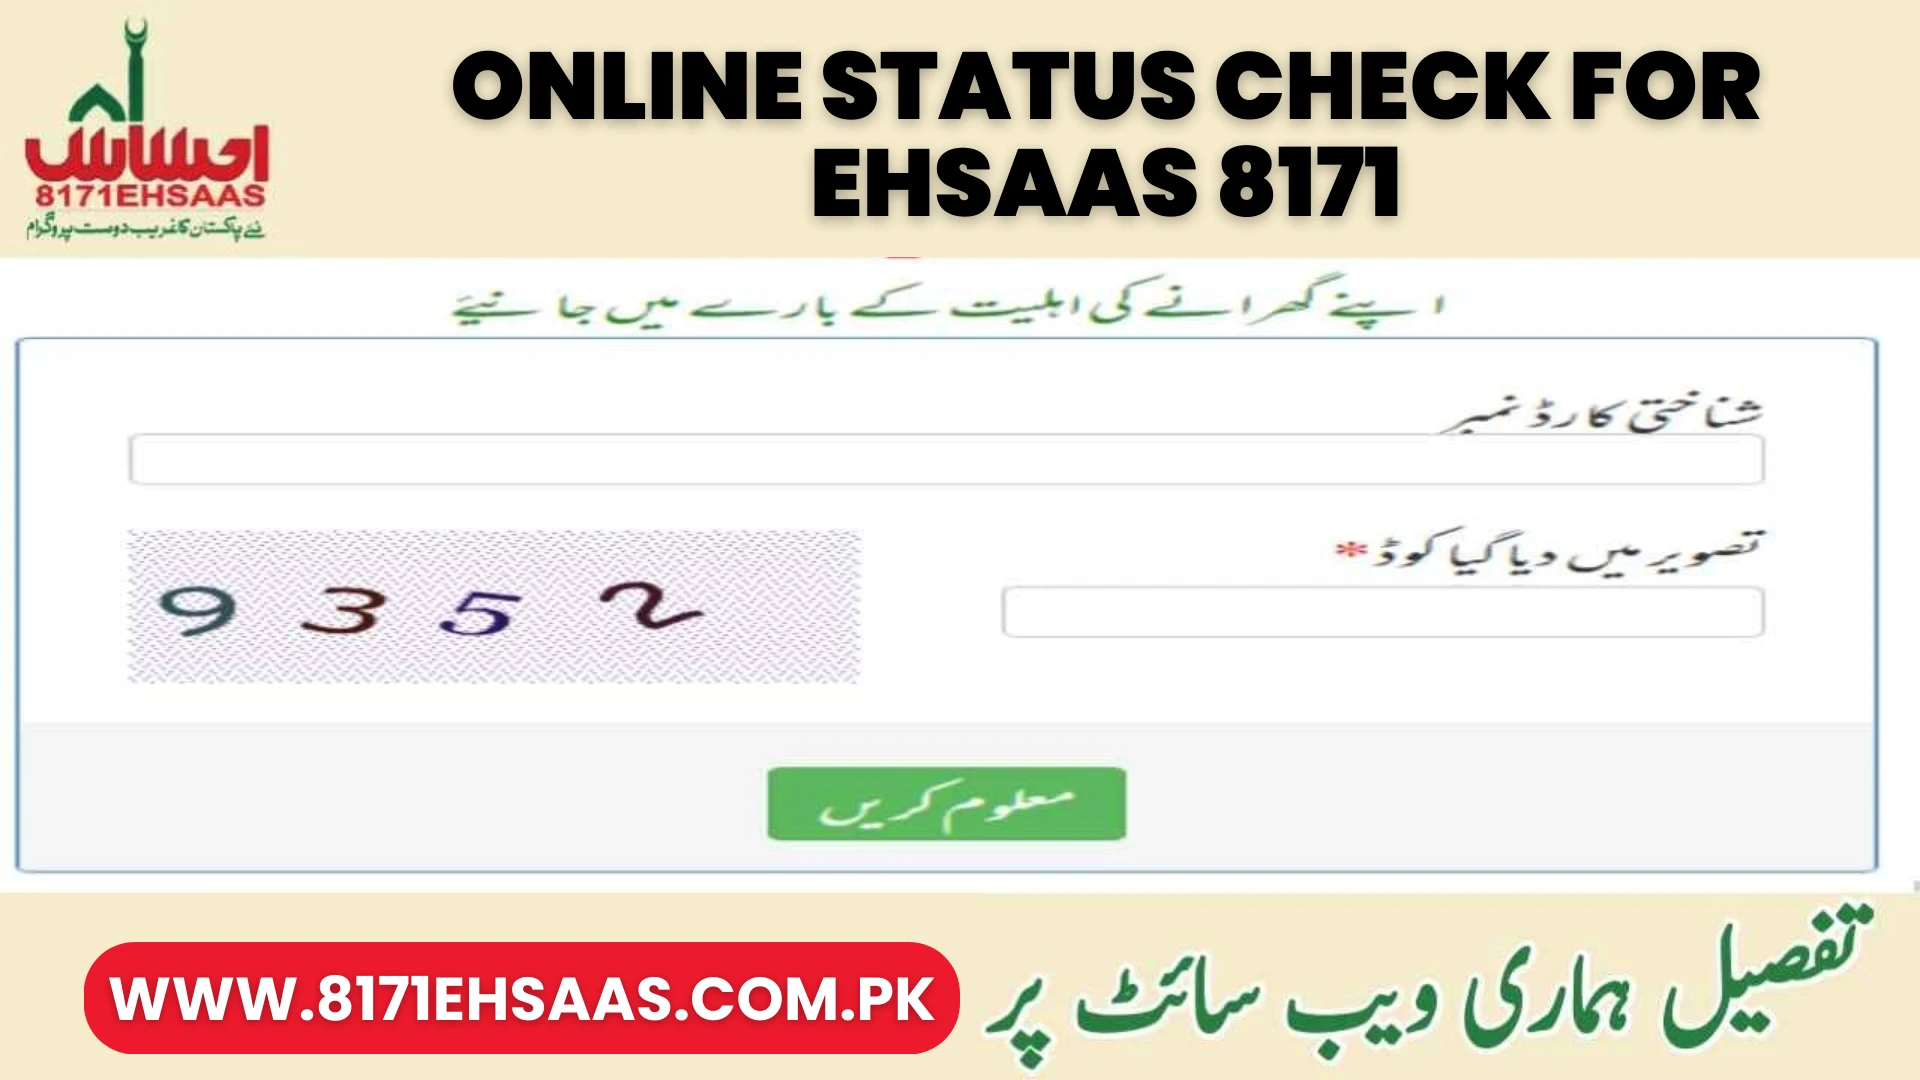 Online status check for Ehsaas 8171